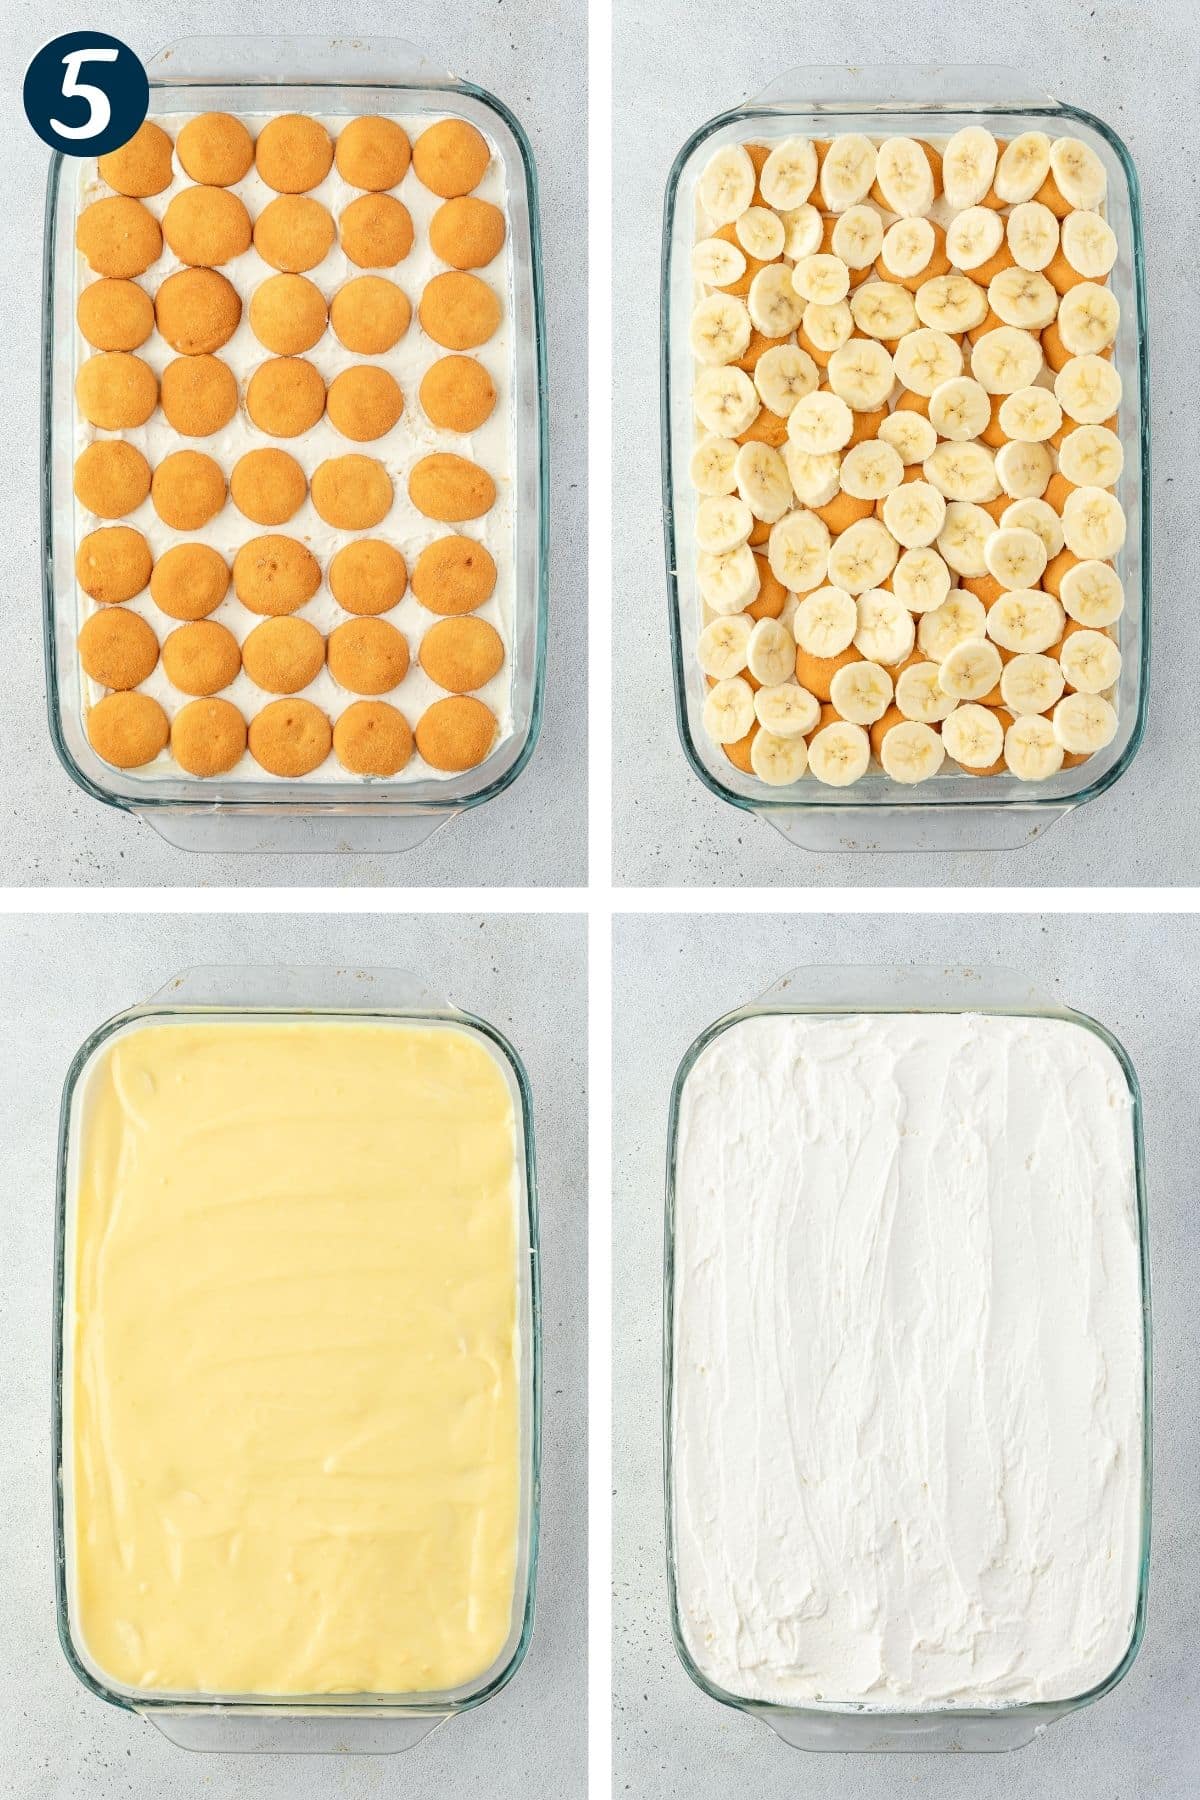 4 images showing the layers of the banana split lasagna: cookies, bananas, pudding, then whipped cream.